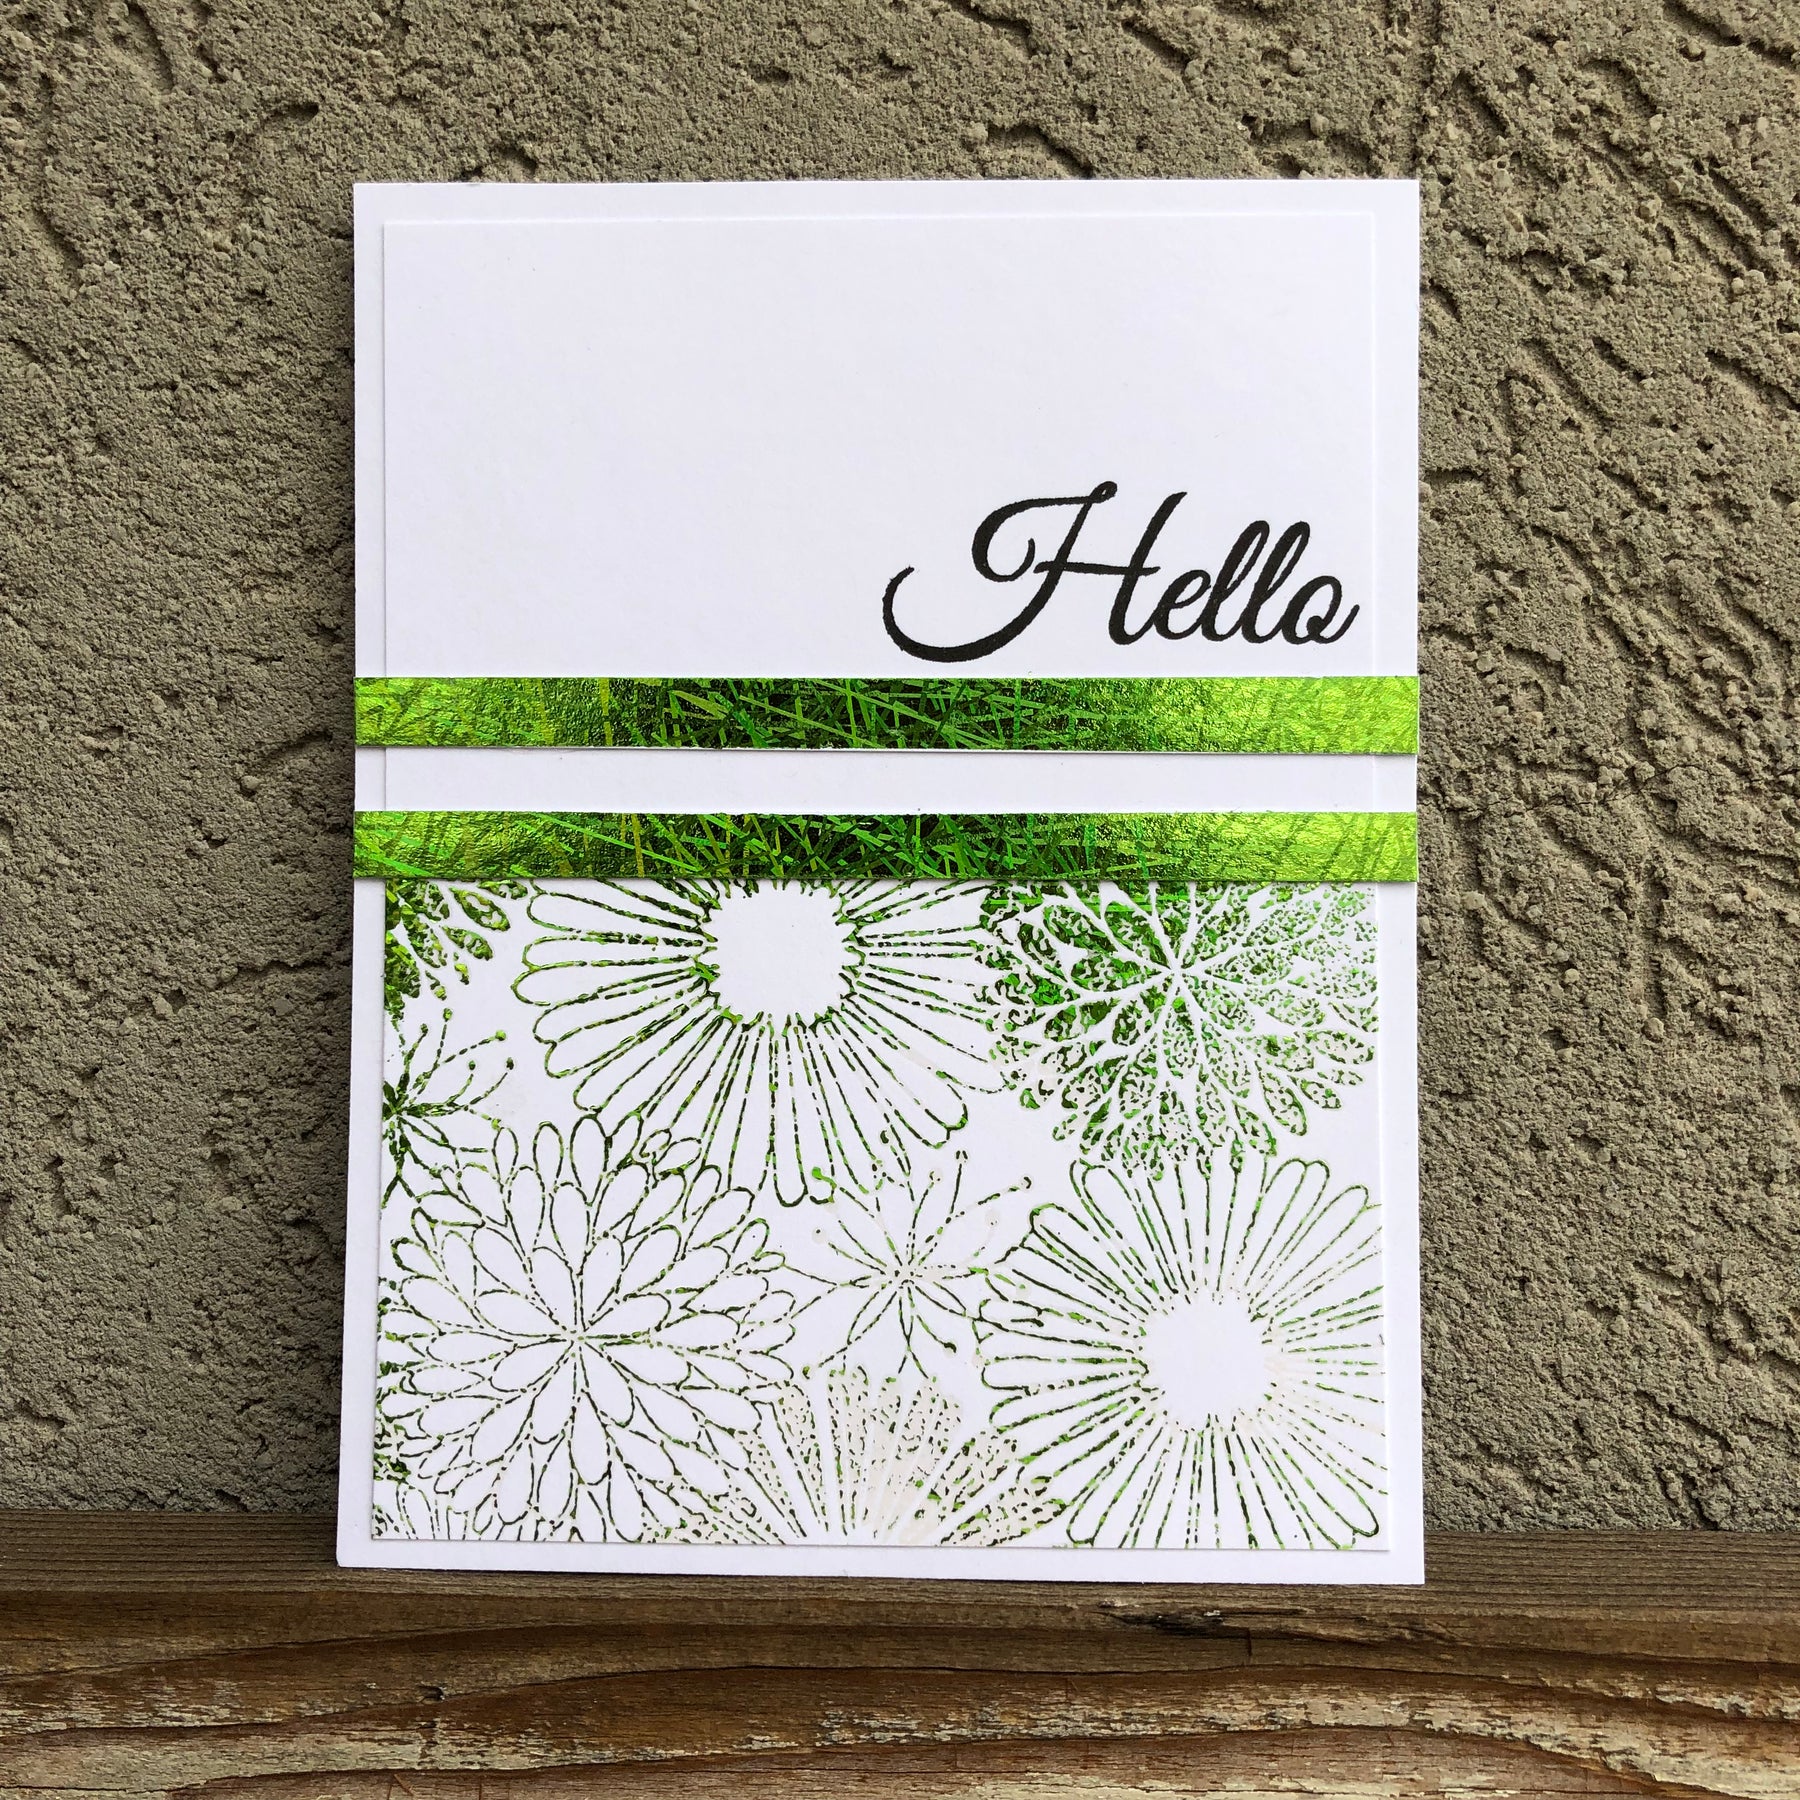 Stamping foil using embossing ink and powders.